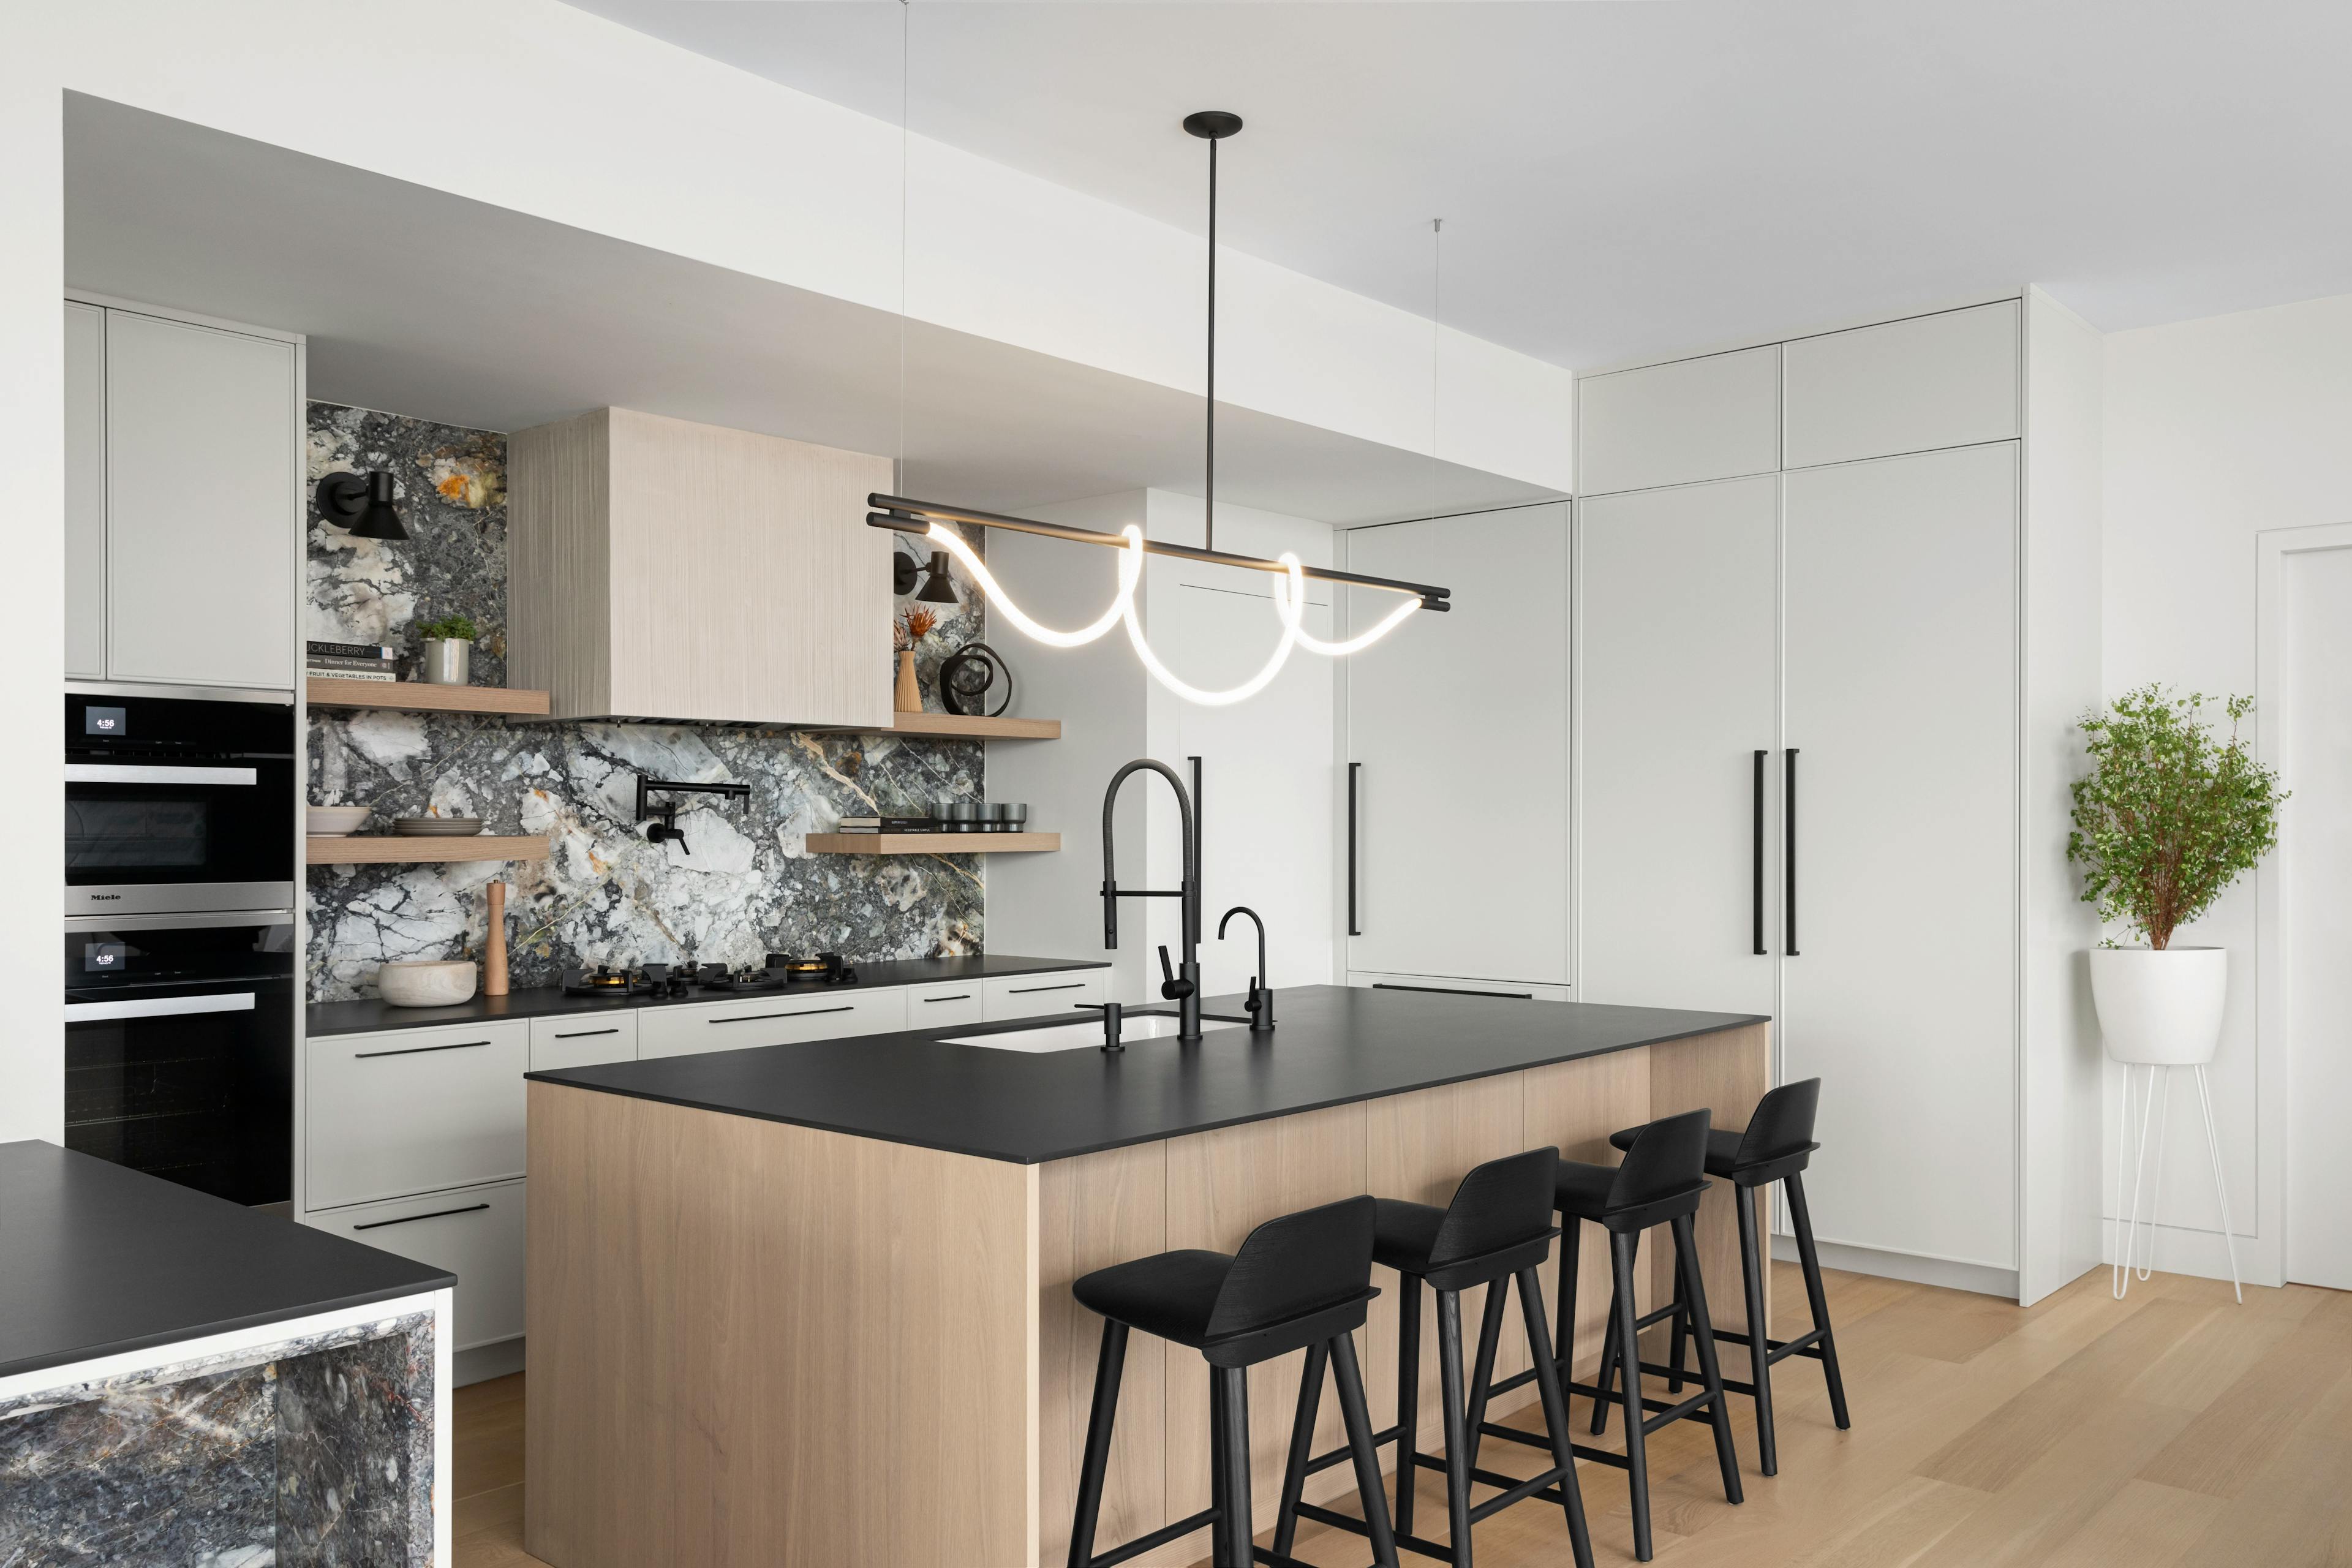 Modern kitchen with a large beige island, black kitchen stools, and marbled granite backsplash in a Brooklyn apartment.